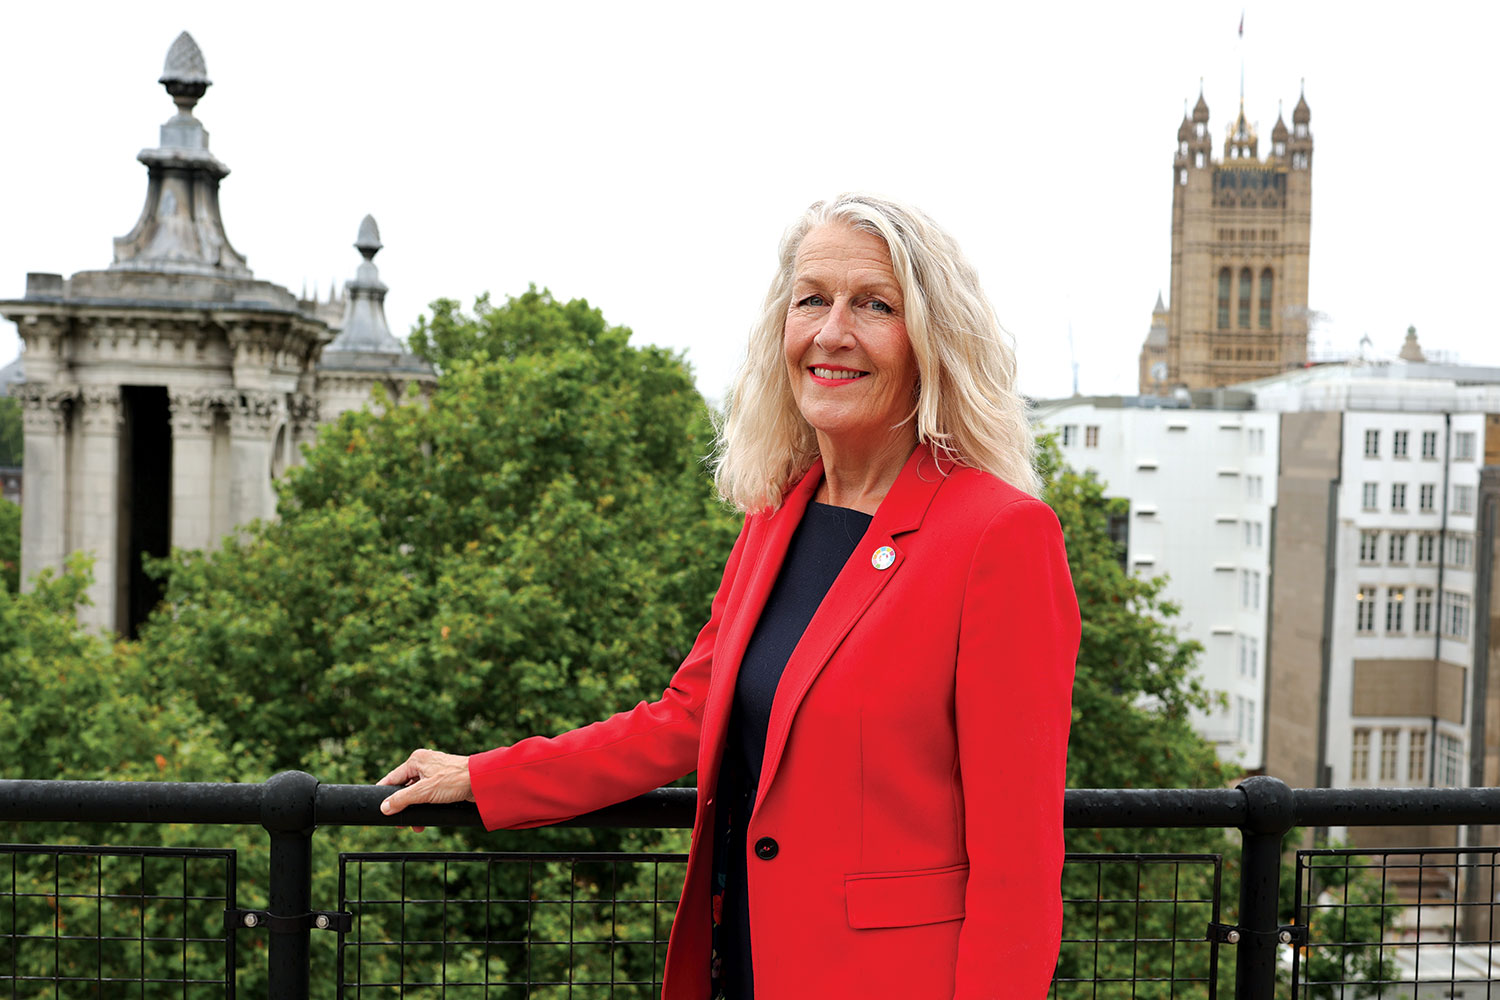 Cllr Louise Gittins standing in a balcony